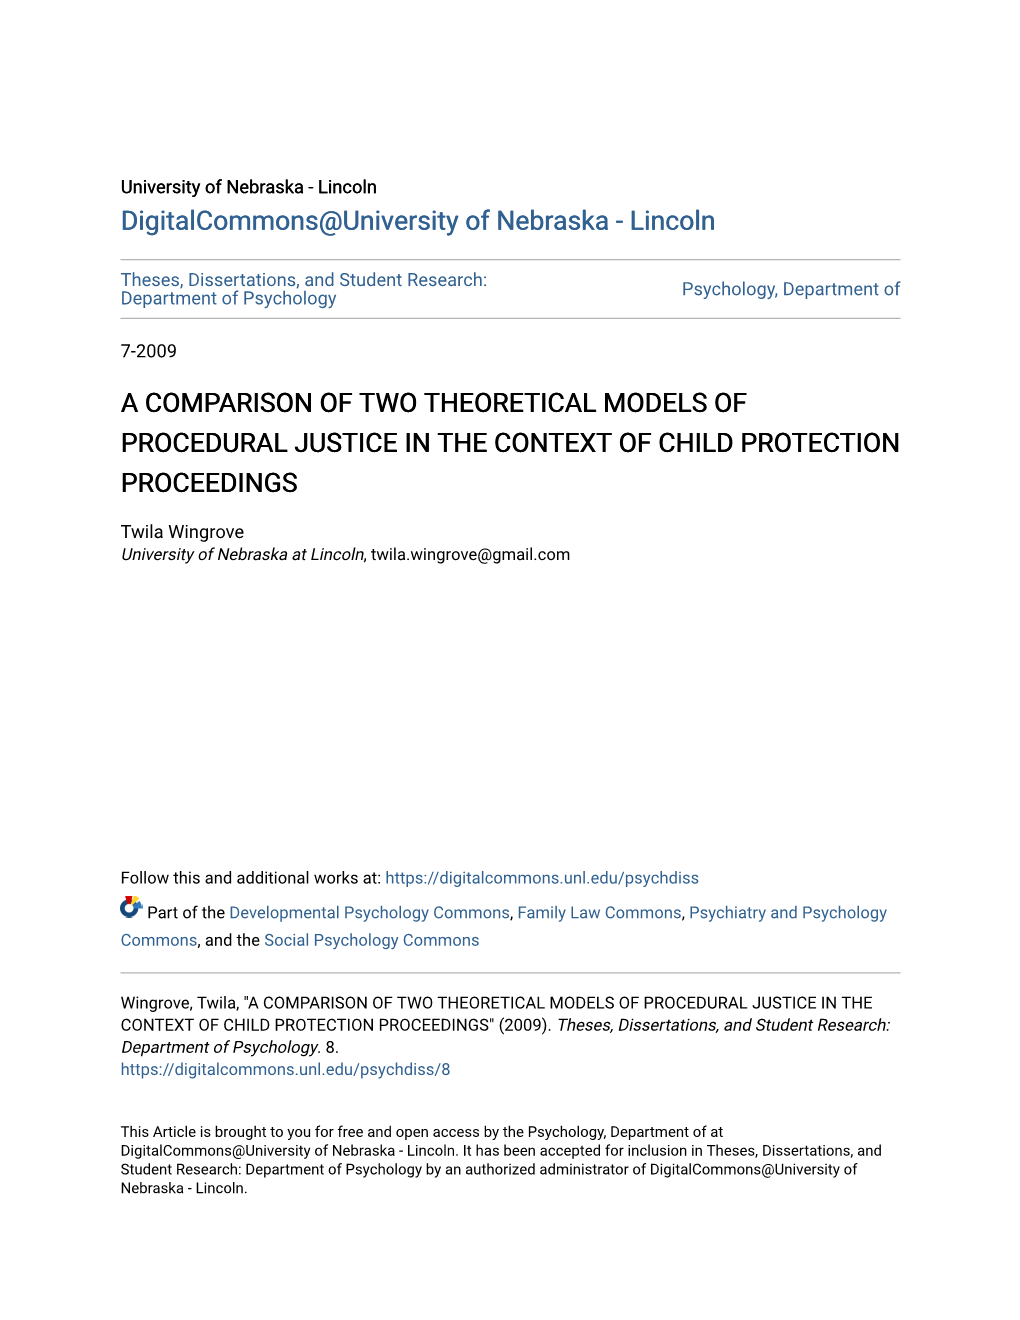 A Comparison of Two Theoretical Models of Procedural Justice in the Context of Child Protection Proceedings